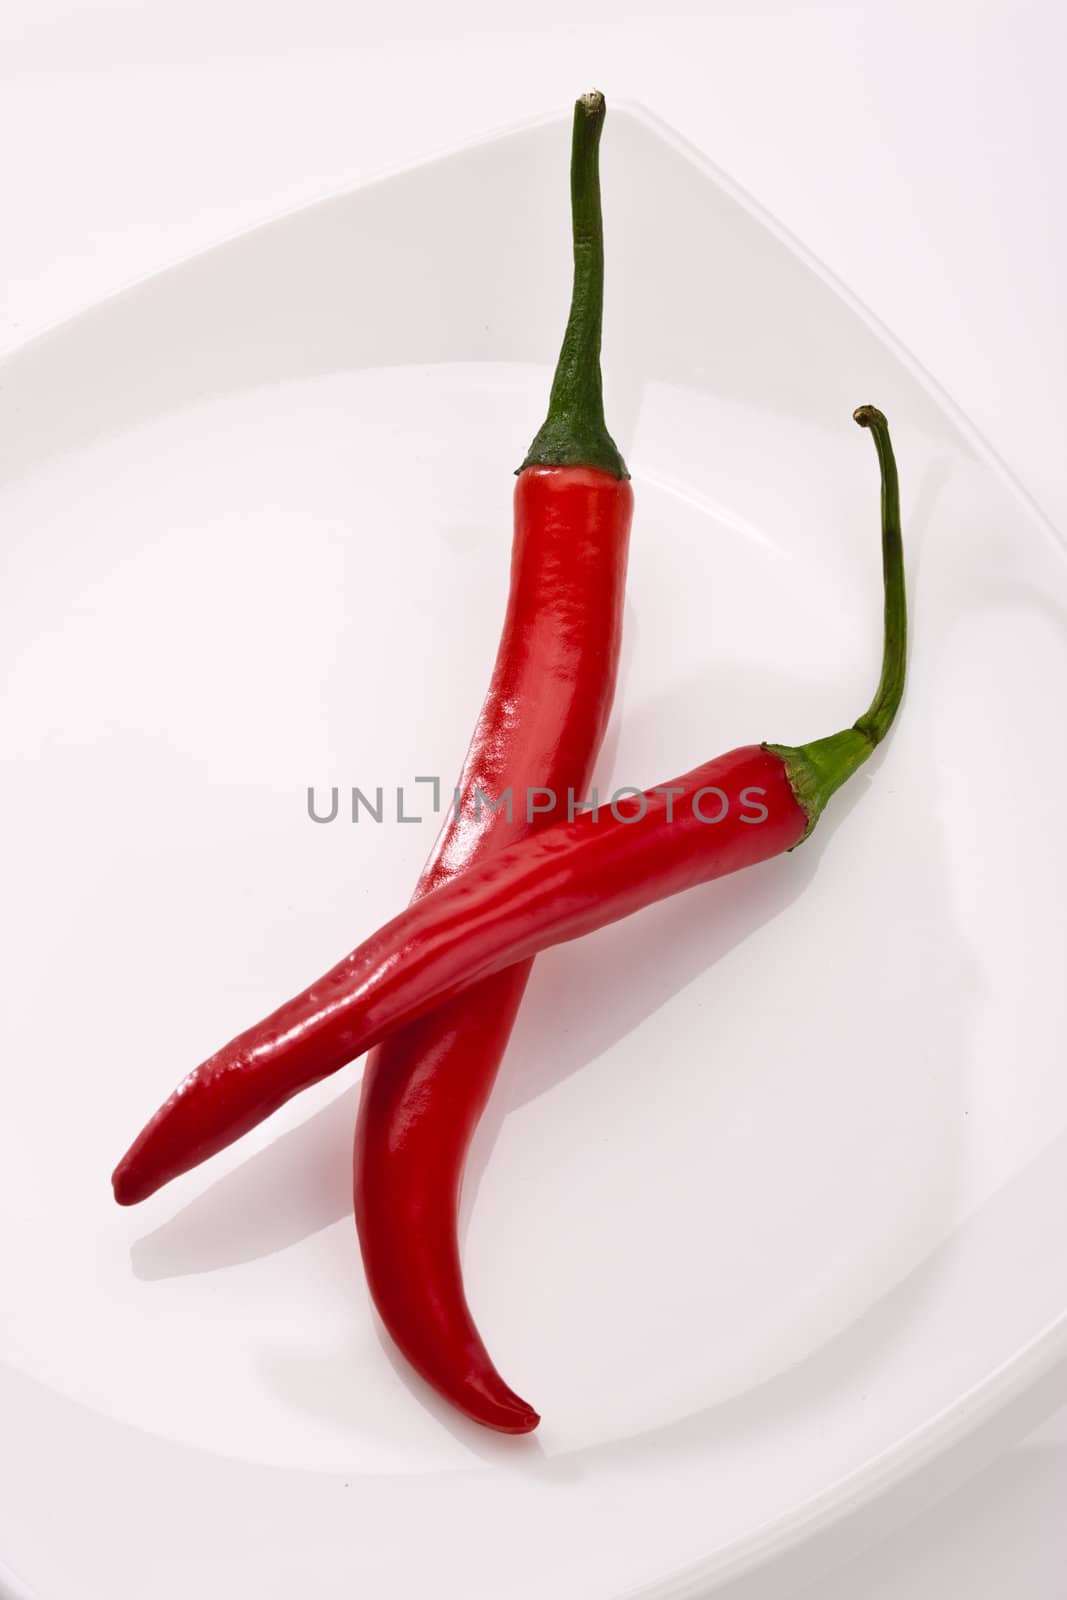 food series: some red peppers on the white background